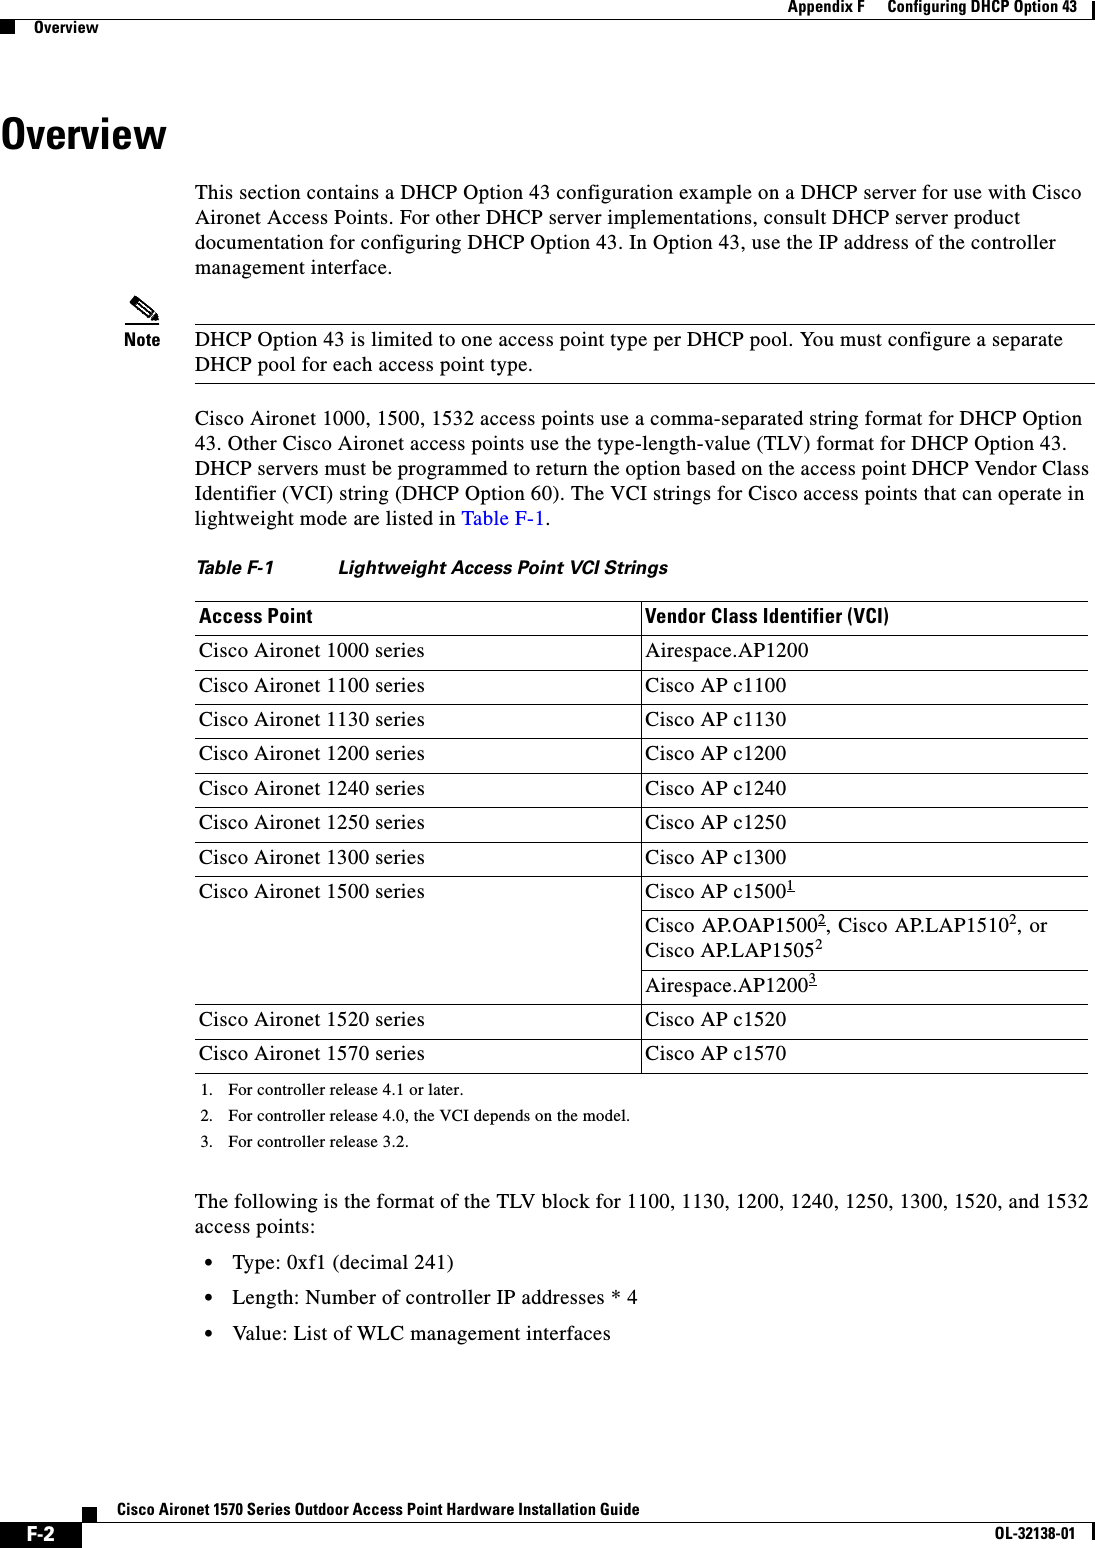  F-2Cisco Aironet 1570 Series Outdoor Access Point Hardware Installation GuideOL-32138-01Appendix F      Configuring DHCP Option 43OverviewOverviewThis section contains a DHCP Option 43 configuration example on a DHCP server for use with Cisco Aironet Access Points. For other DHCP server implementations, consult DHCP server product documentation for configuring DHCP Option 43. In Option 43, use the IP address of the controller management interface.Note DHCP Option 43 is limited to one access point type per DHCP pool. You must configure a separate DHCP pool for each access point type.Cisco Aironet 1000, 1500, 1532 access points use a comma-separated string format for DHCP Option 43. Other Cisco Aironet access points use the type-length-value (TLV) format for DHCP Option 43. DHCP servers must be programmed to return the option based on the access point DHCP Vendor Class Identifier (VCI) string (DHCP Option 60). The VCI strings for Cisco access points that can operate in lightweight mode are listed in Table F-1. The following is the format of the TLV block for 1100, 1130, 1200, 1240, 1250, 1300, 1520, and 1532 access points: •Type: 0xf1 (decimal 241) •Length: Number of controller IP addresses * 4 •Value: List of WLC management interfaces Table F-1 Lightweight Access Point VCI StringsAccess Point Vendor Class Identifier (VCI)Cisco Aironet 1000 series Airespace.AP1200Cisco Aironet 1100 series Cisco AP c1100Cisco Aironet 1130 series Cisco AP c1130Cisco Aironet 1200 series Cisco AP c1200Cisco Aironet 1240 series Cisco AP c1240Cisco Aironet 1250 series Cisco AP c1250Cisco Aironet 1300 series Cisco AP c1300Cisco Aironet 1500 series Cisco AP c150011. For controller release 4.1 or later.Cisco AP.OAP15002, Cisco AP.LAP15102, orCisco AP.LAP15052 2. For controller release 4.0, the VCI depends on the model.Airespace.AP120033. For controller release 3.2.Cisco Aironet 1520 series Cisco AP c1520Cisco Aironet 1570 series Cisco AP c1570